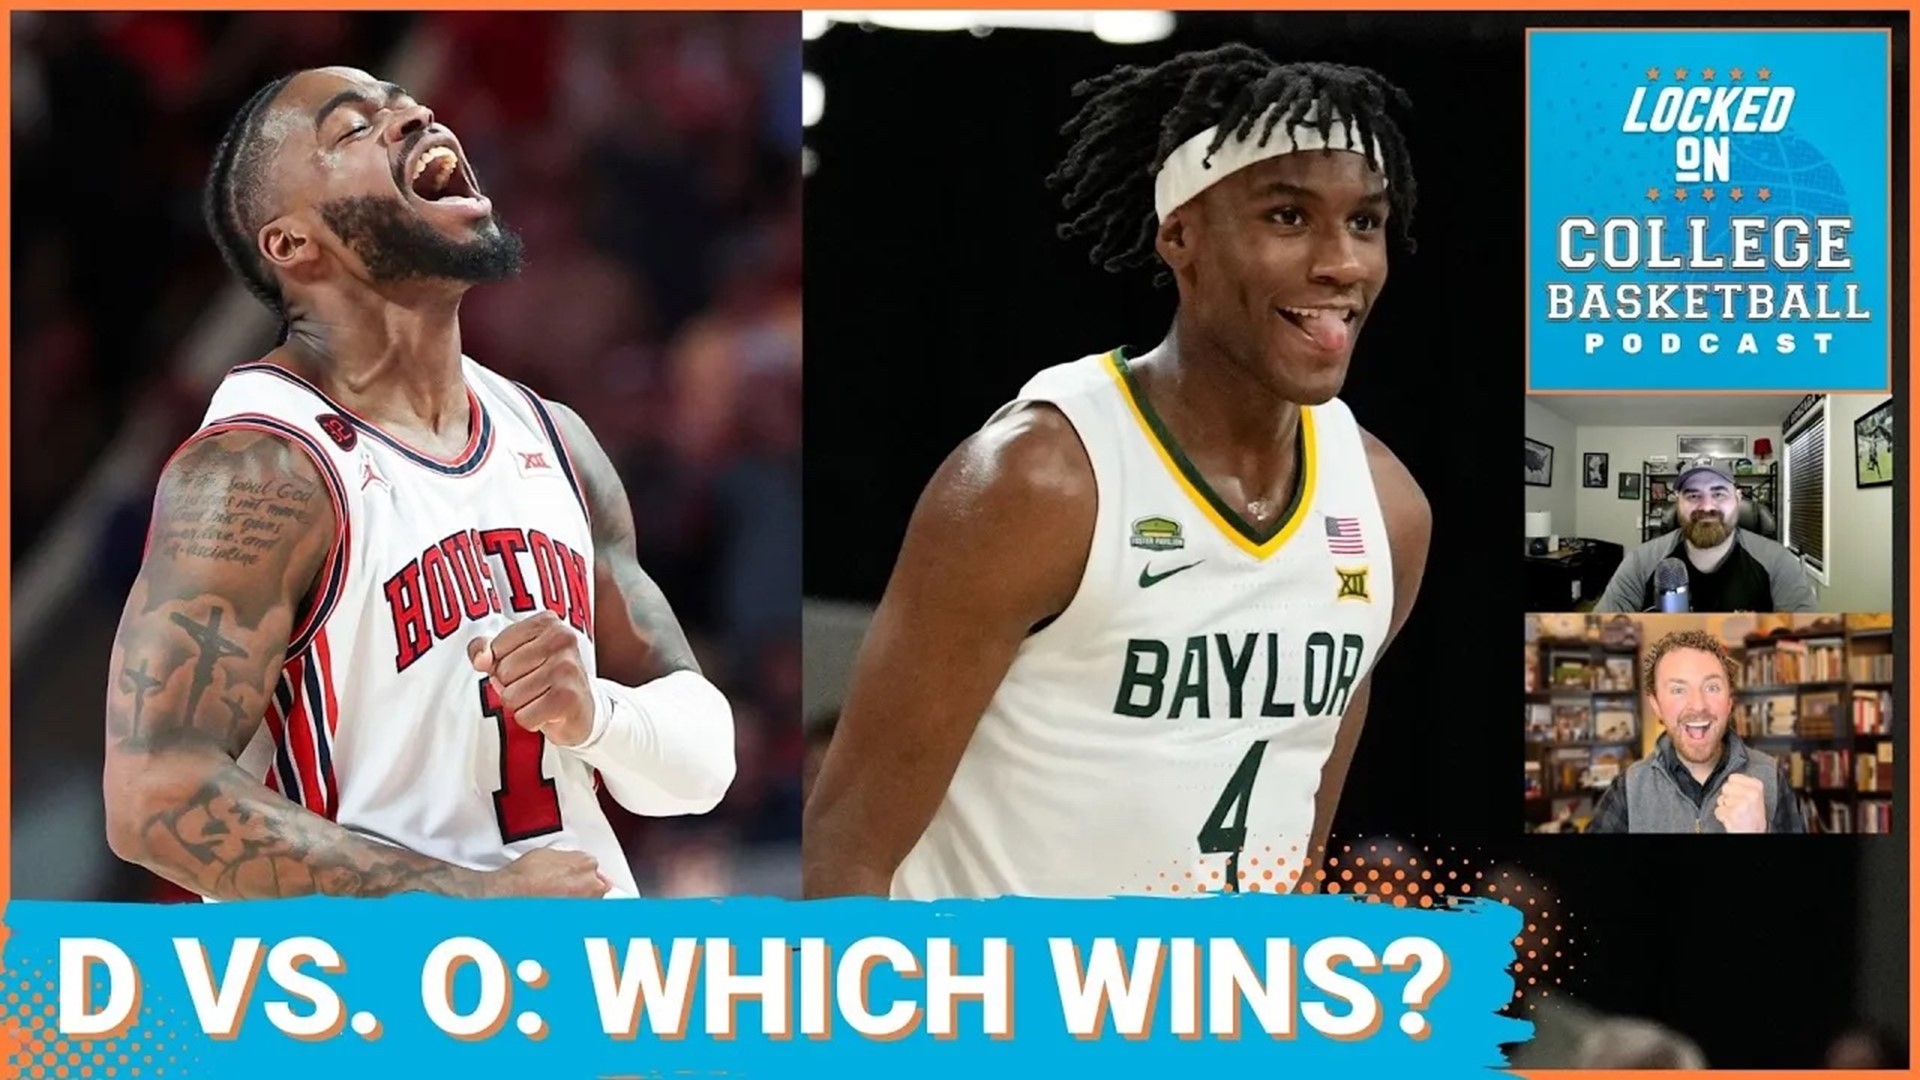 Houston’s top-ranked defense travels to Waco to take on Baylor’s fourth-ranked offense (per KenPom). Something’s gotta give in this matchup.